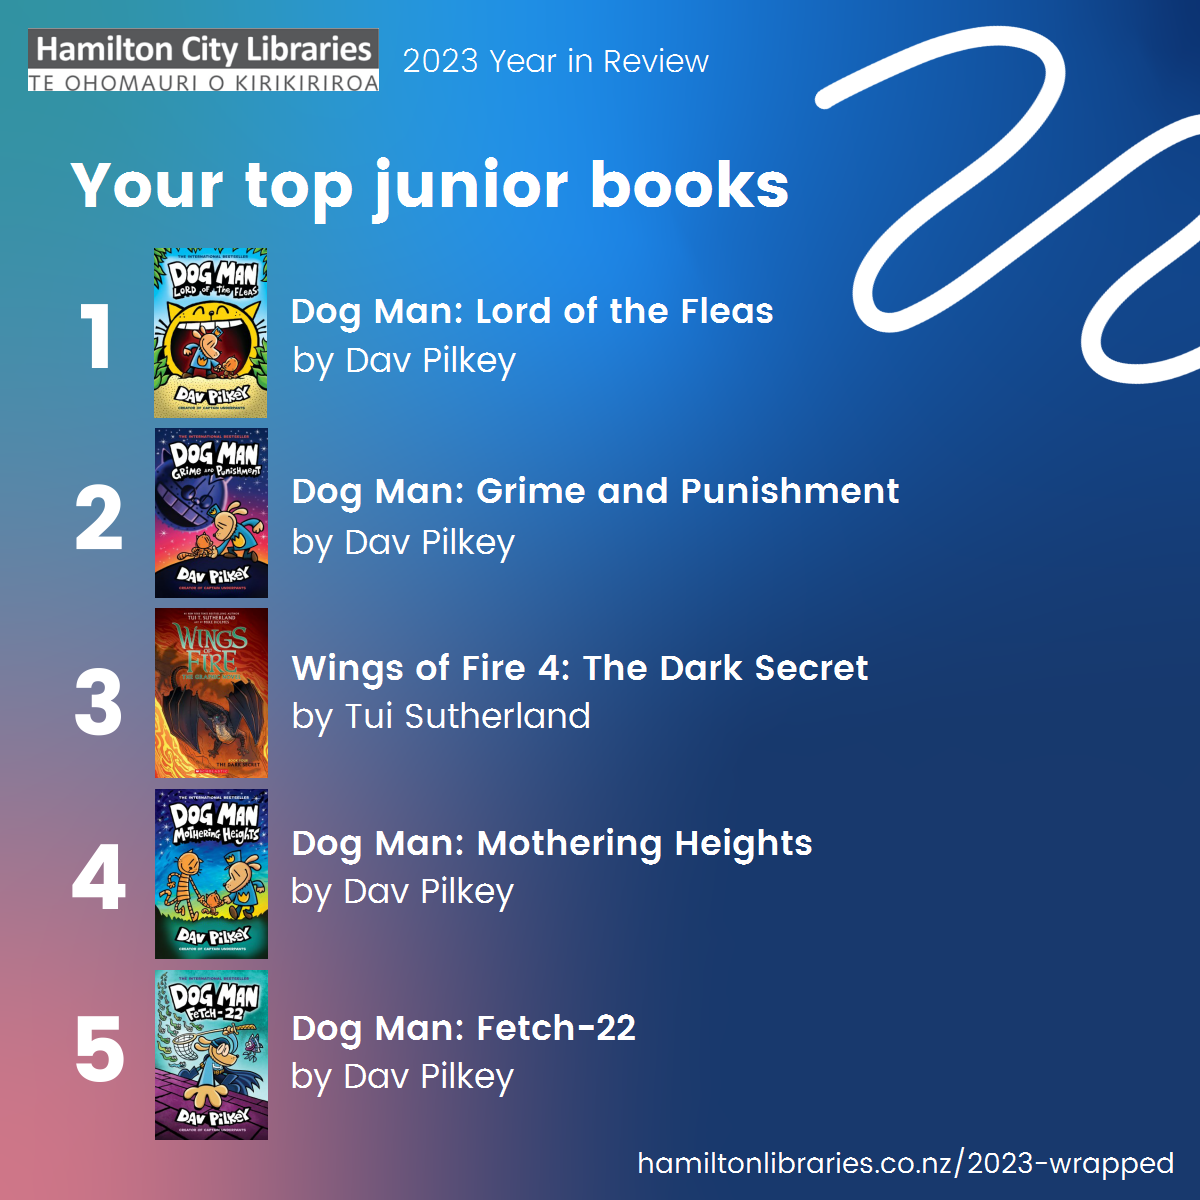 Top 5 Junior books: Dog Man: Lord of The Fleas, Dog Man: Grime and Punishment: Wings of Fire 4: The Dark Secret, Dog Man: Mothering Heights, Dog Man: Fetch-22